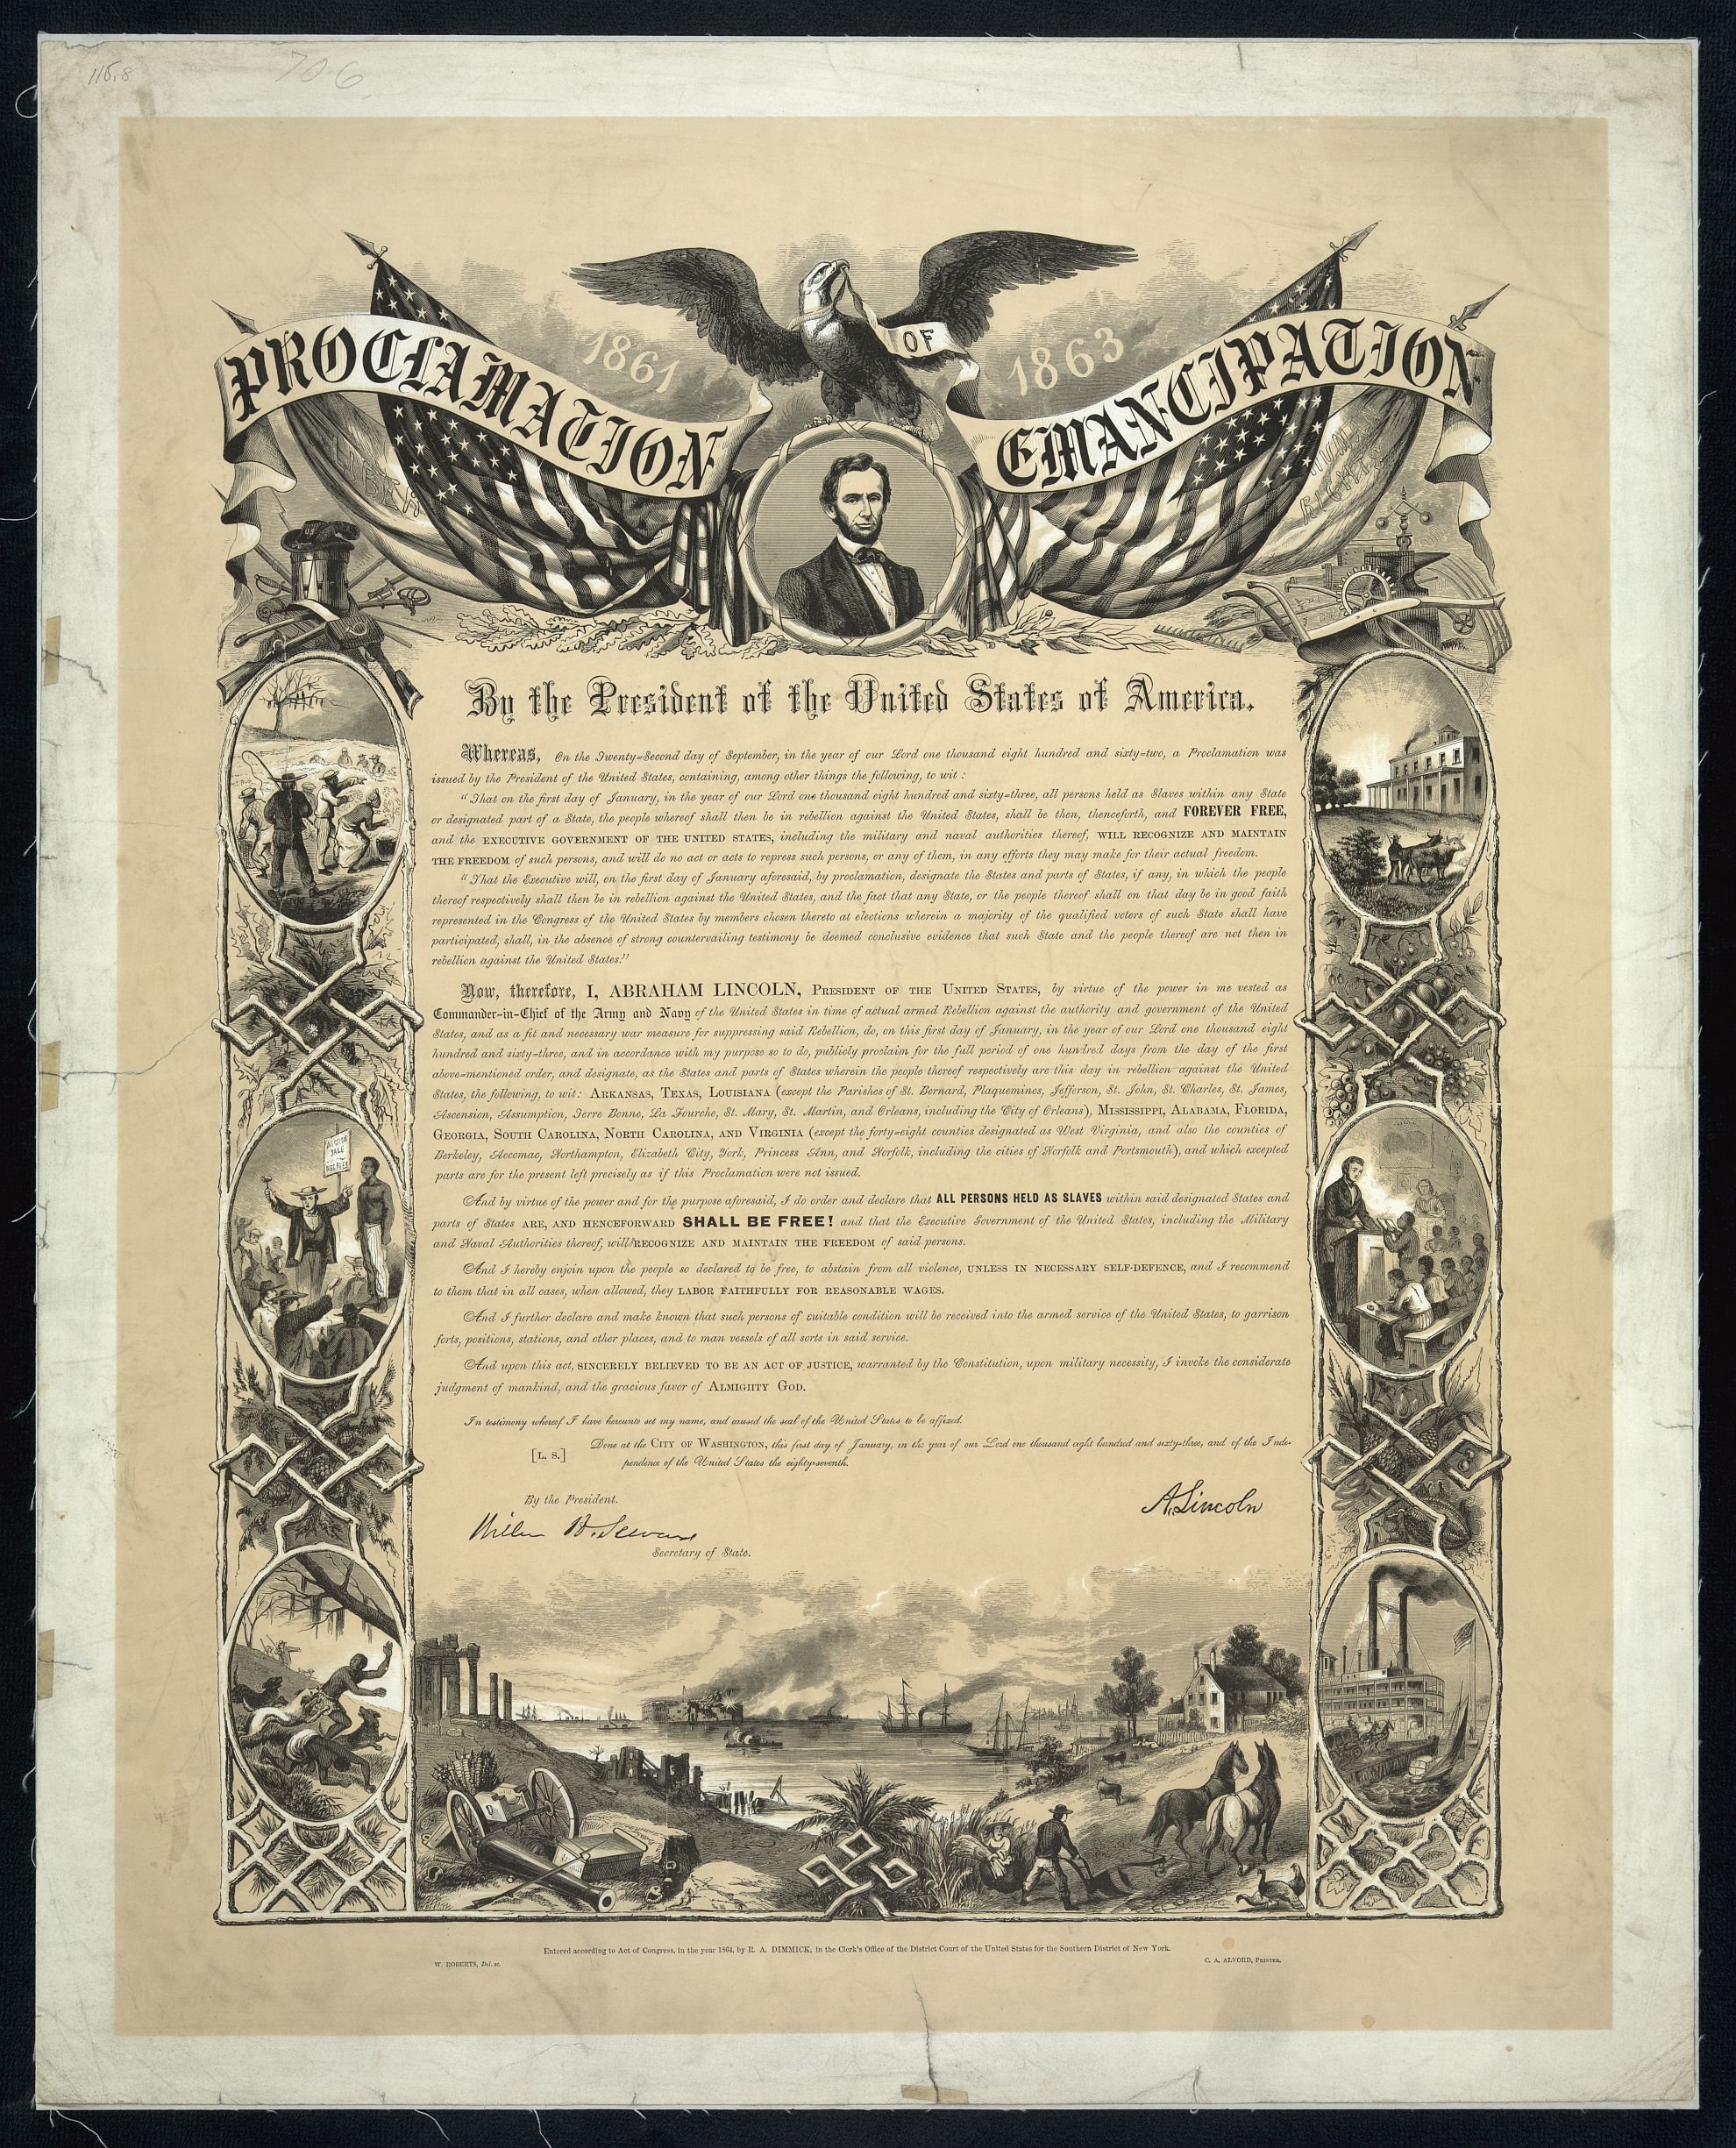 Photograph of a reproduction of the Emancipation Proclamation. Library of Congress description: "Eagle with banner 'Proclamation of Emancipation' and U.S. flags over portrait of Abraham Lincoln above text framed along the sides with vignettes about slavery, escape, education of African Americans, and the American cotton industry. Below the text is an image of rebuilding southern agriculture in the ruins of the Civil War", circa 1864. Engraving by W. Roberts, restoration by Bammesk/Library of Congress. Public Domain.